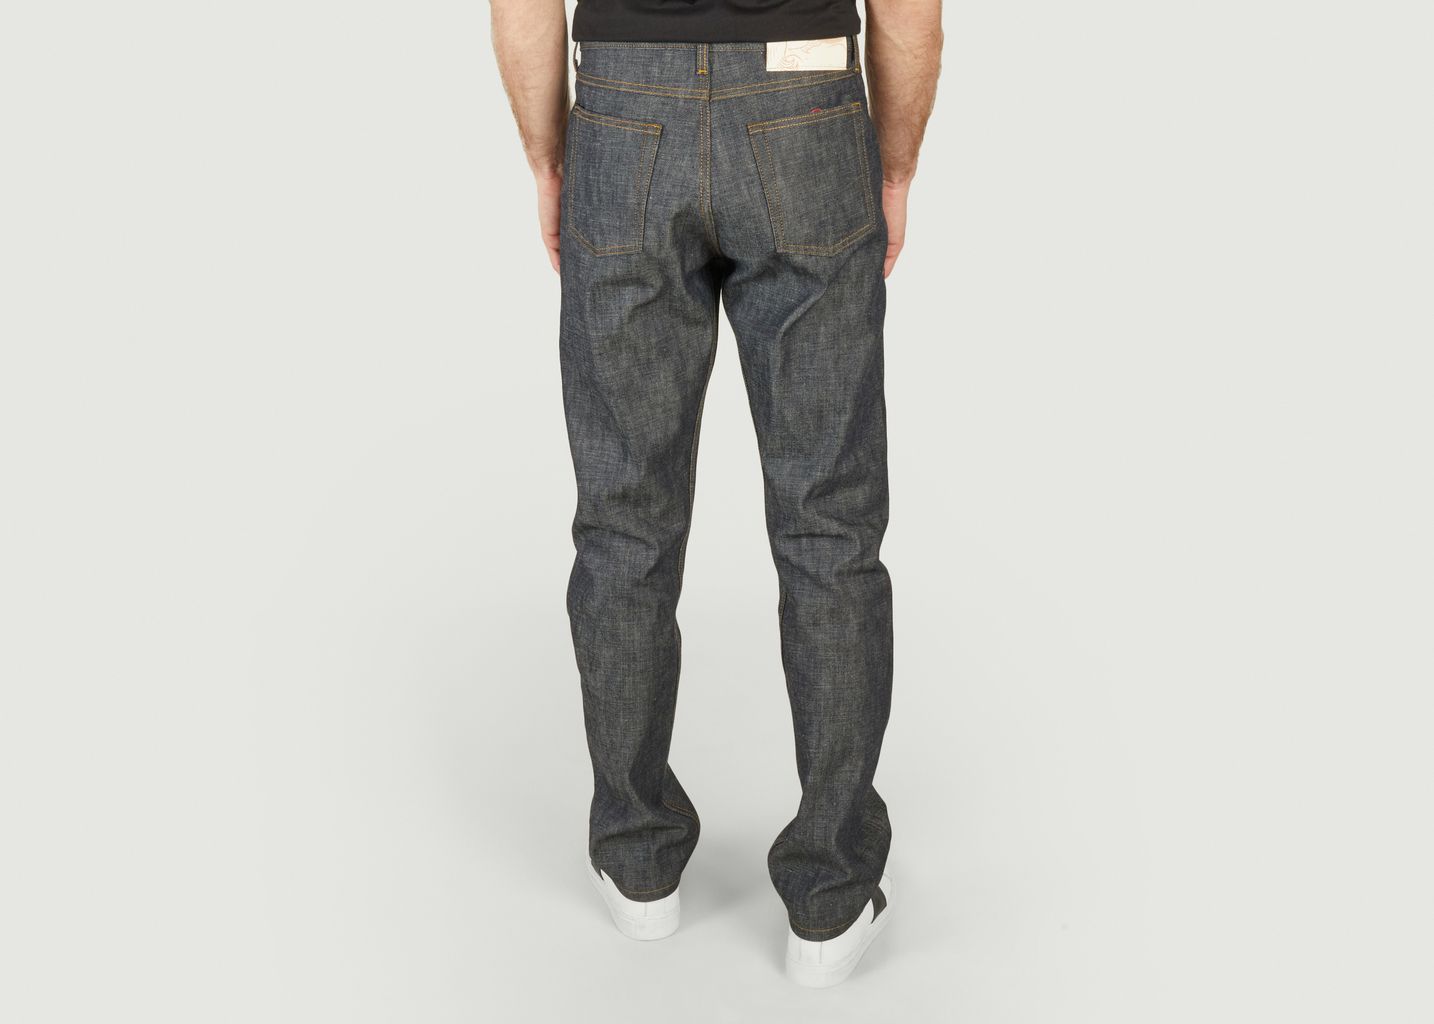 Jean Tried & True Selvedge True Guy - Naked and Famous